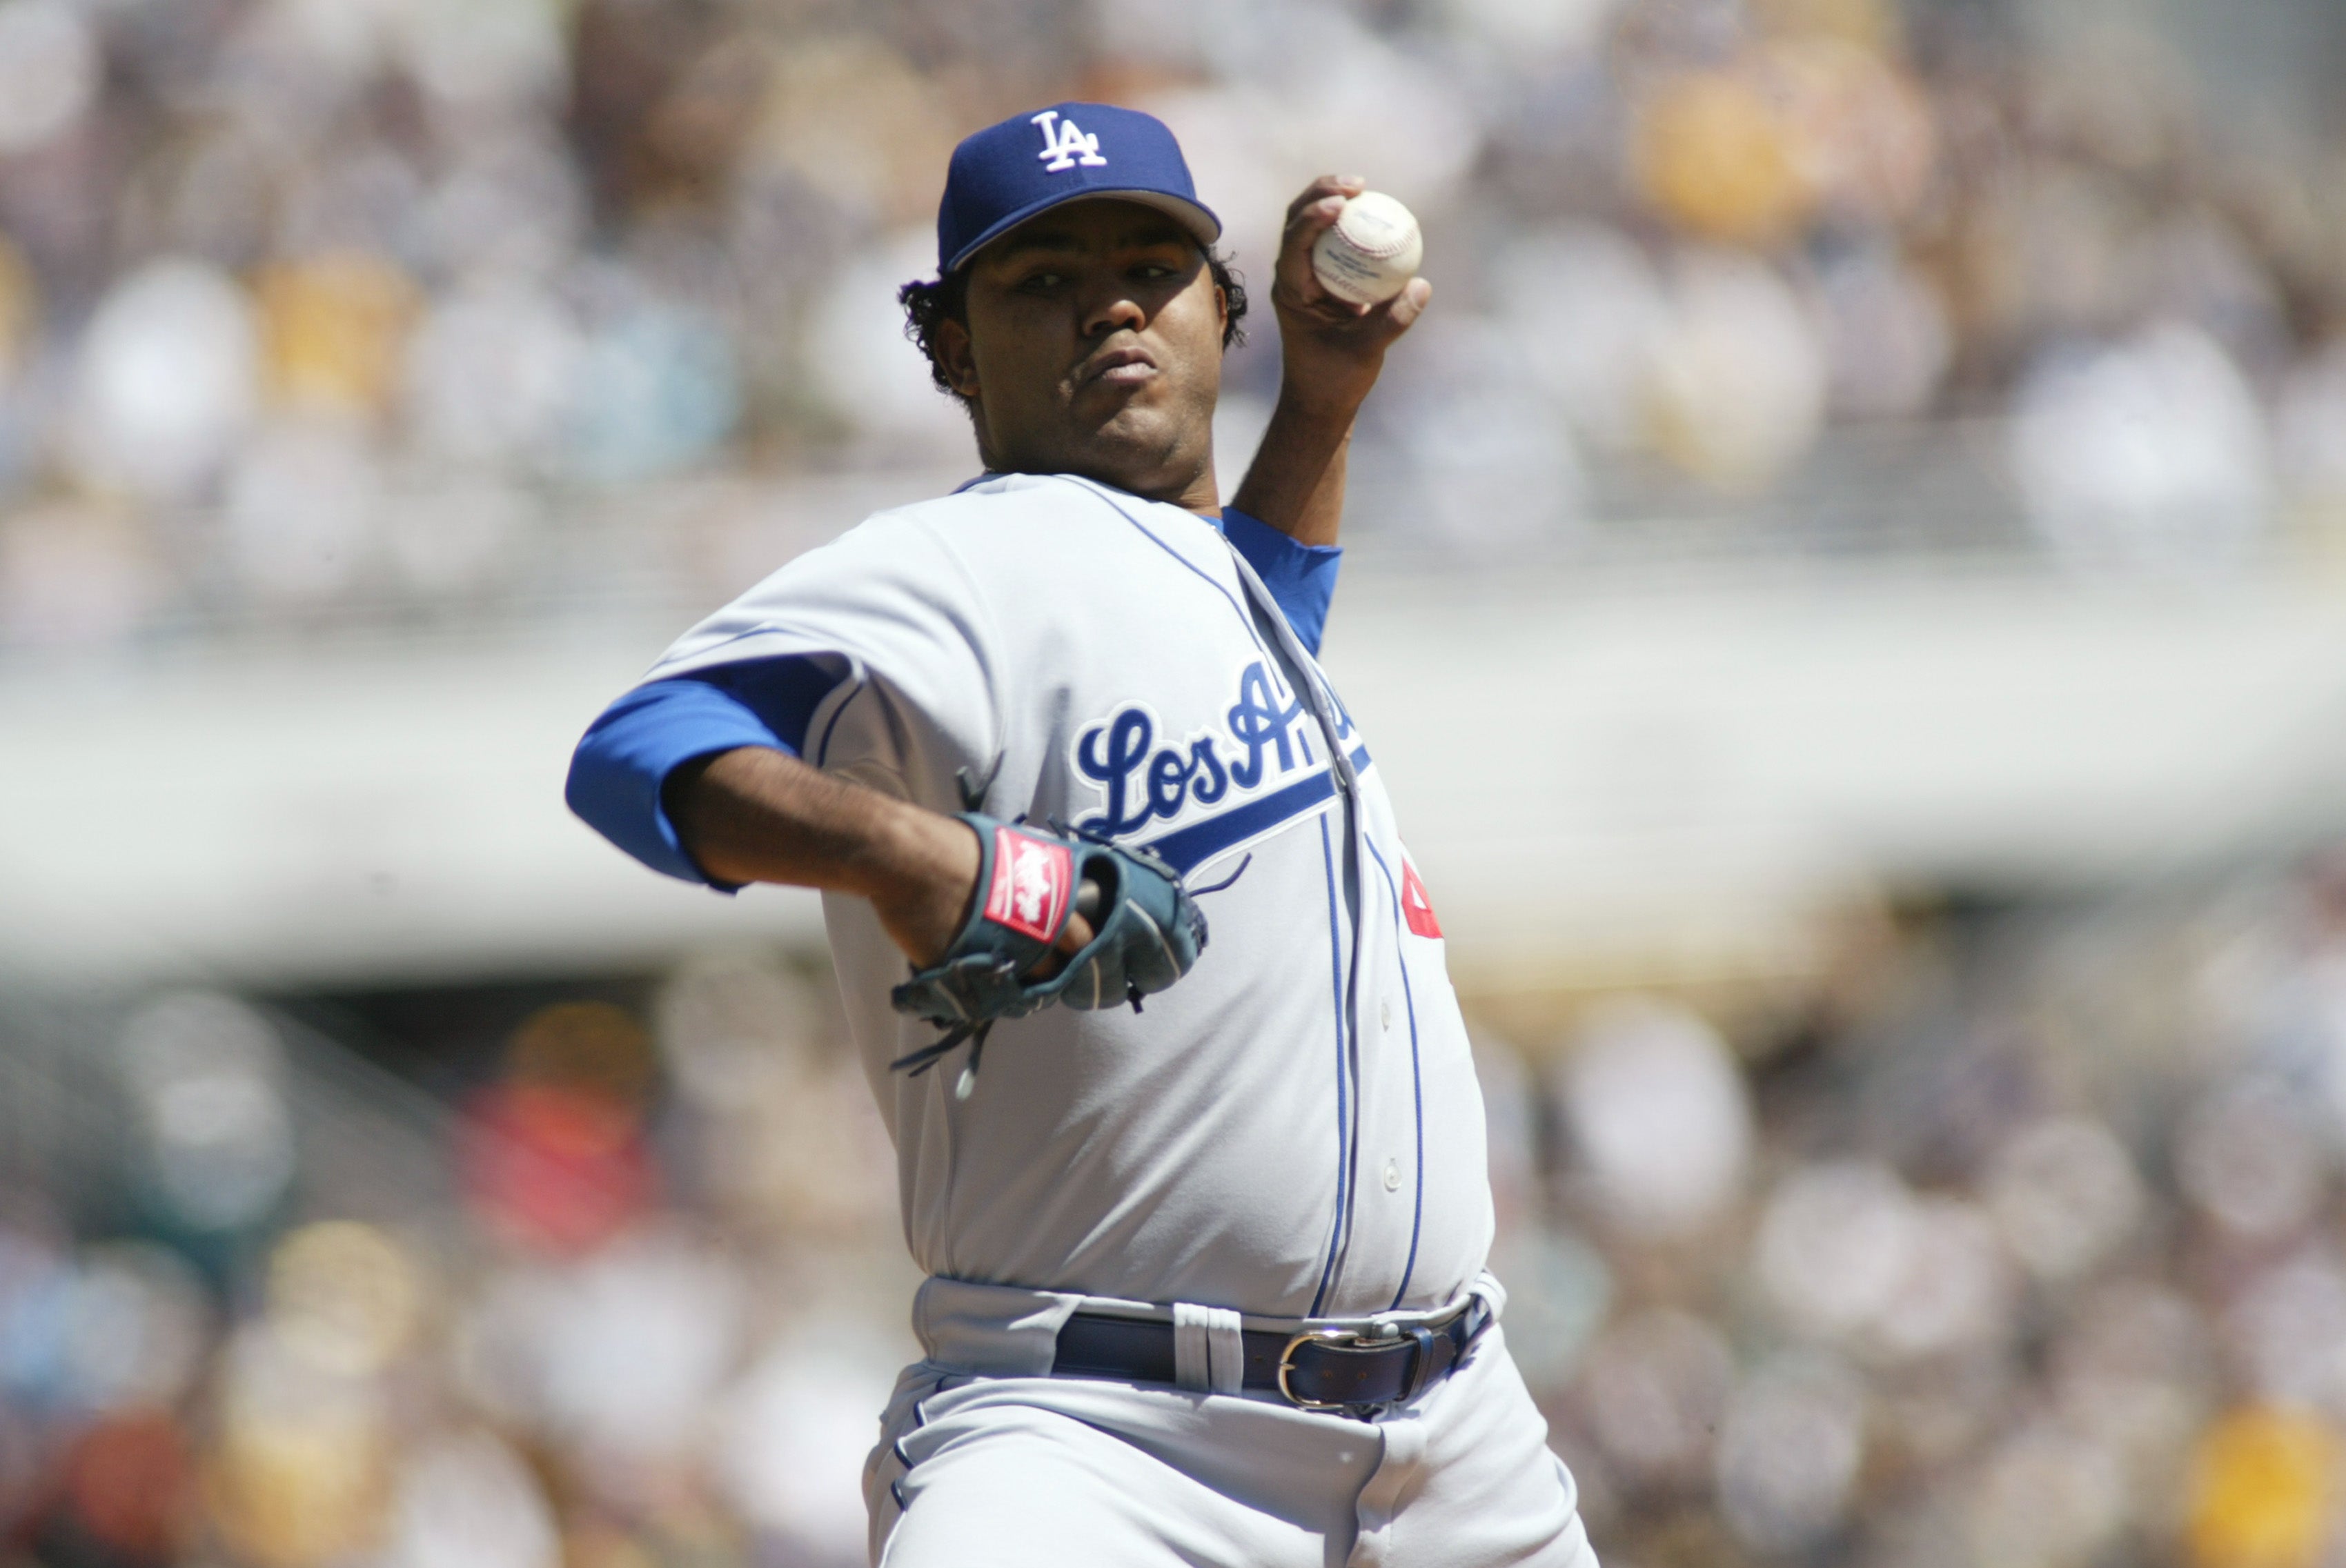 Odalis Perez is pictured during his time playing for the LA Dodgers